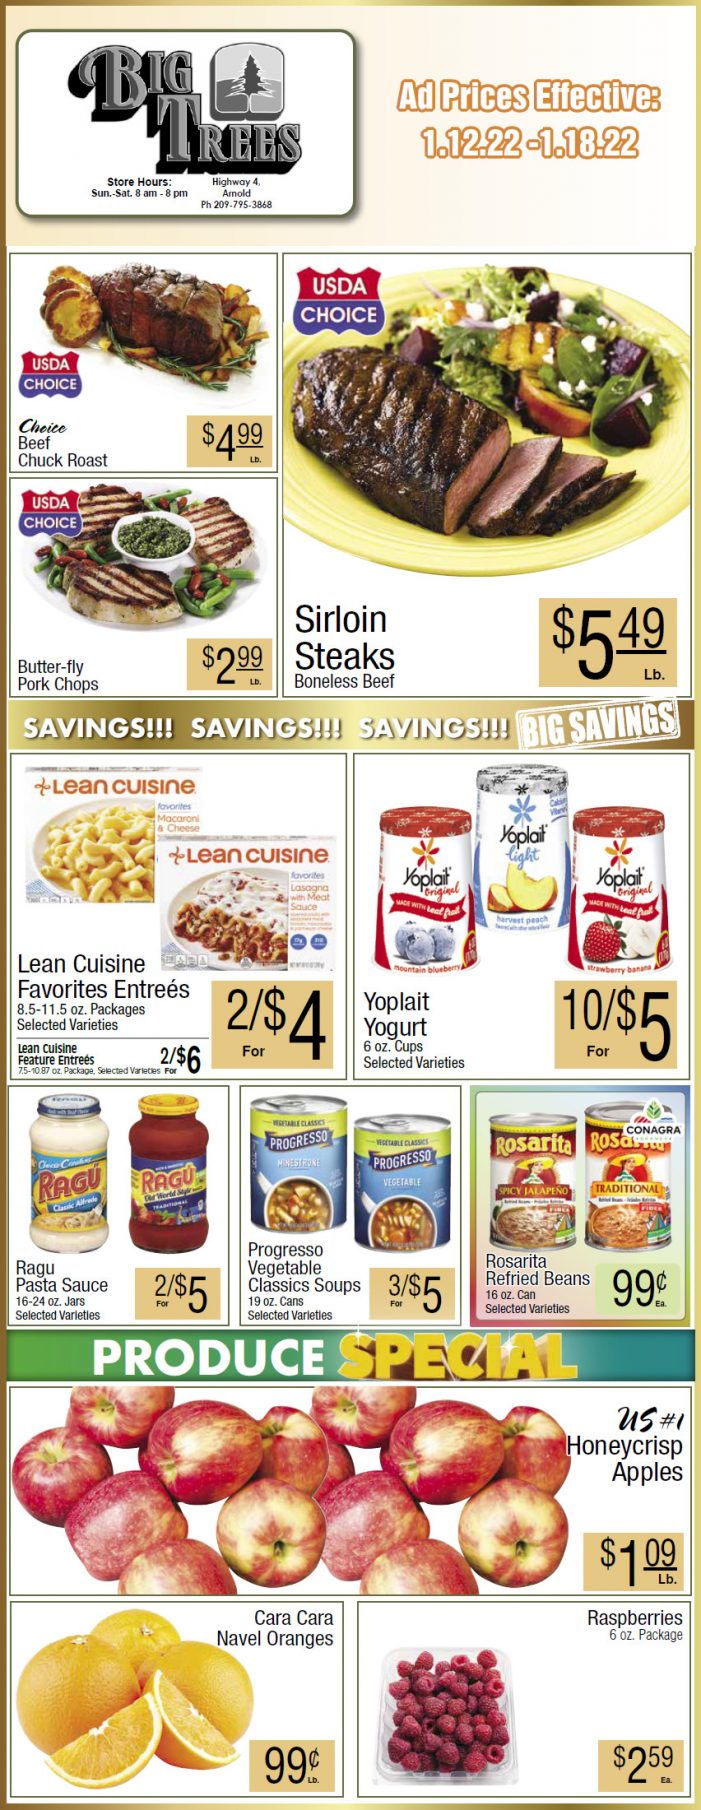 Big Trees Market Weekly Ad & Grocery Specials Through January 18th! Shop Local & Save!